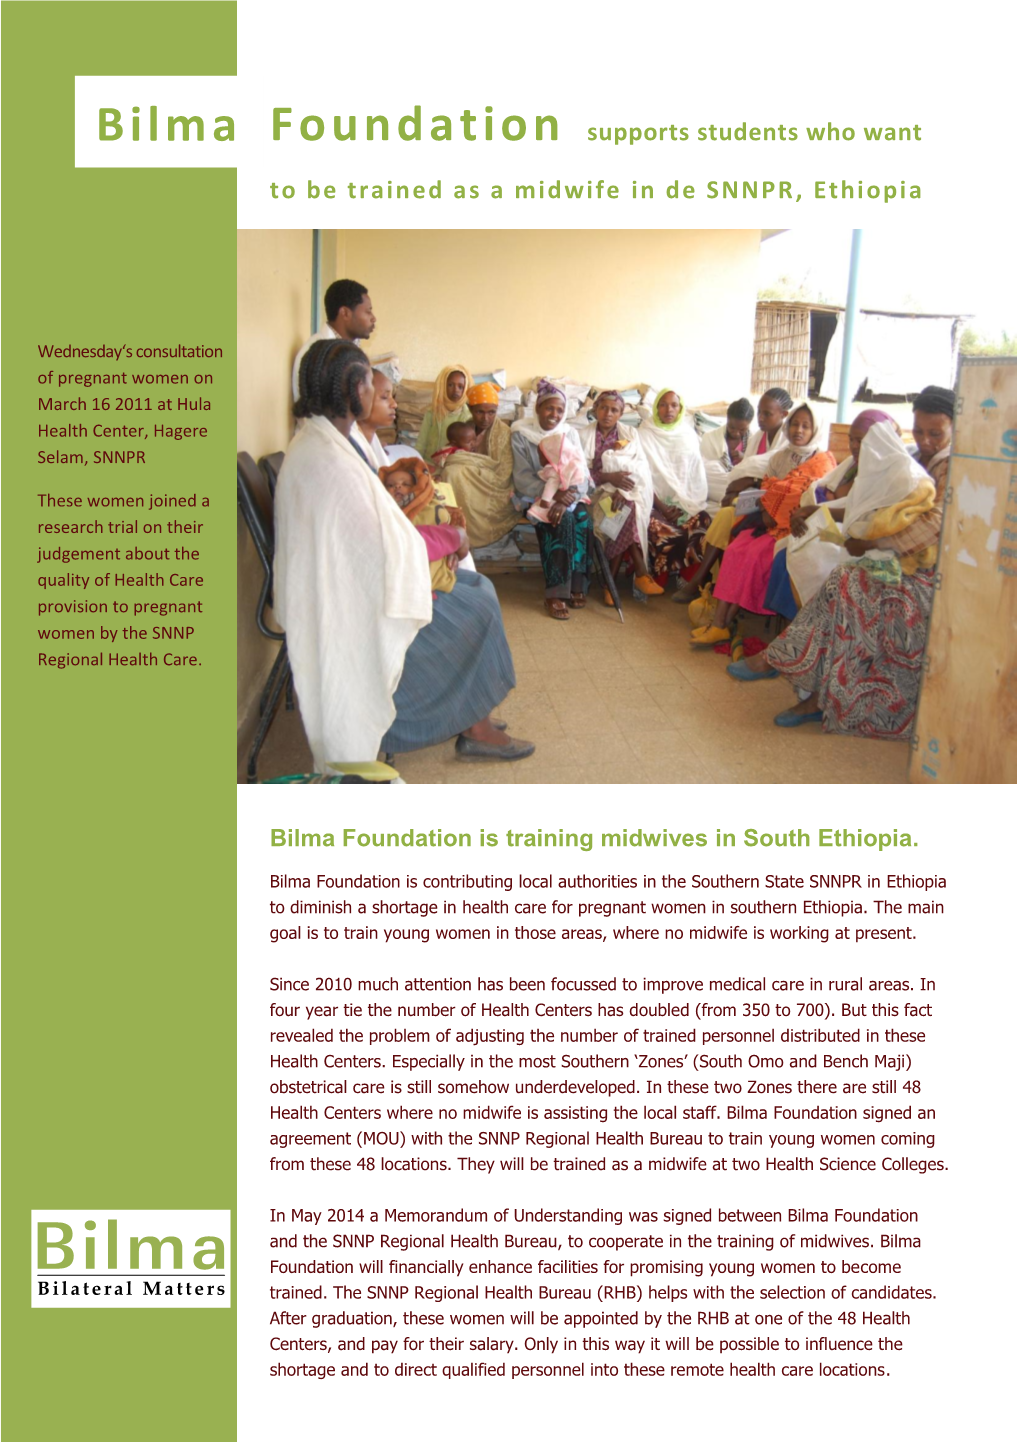 To Be Trained As a Midwife in De SNNPR, Ethiopia